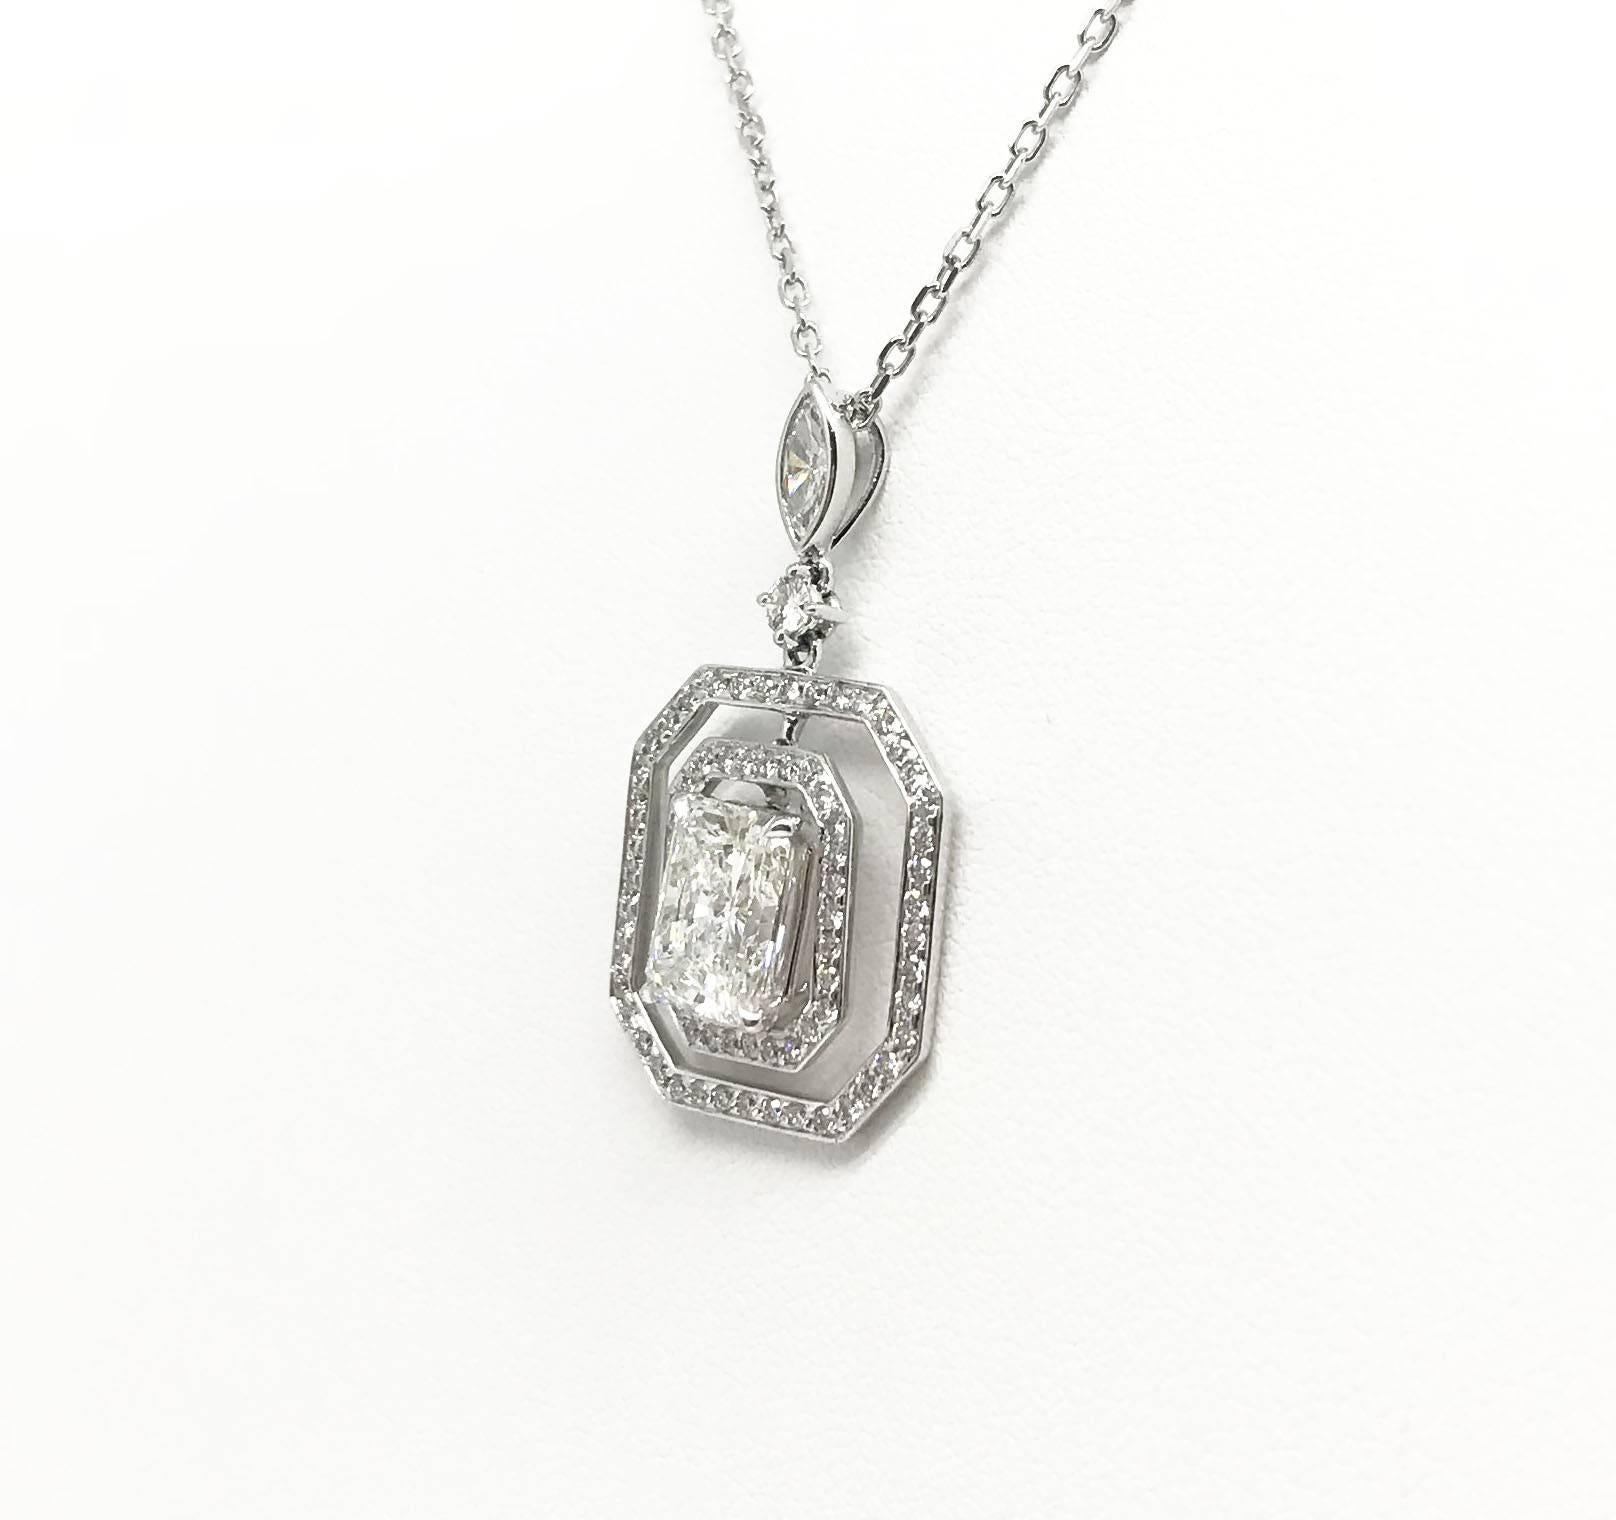 This item is another perfect gift for her everyday wear or special occasions. The pendant features a H Colour Internally Flawless 2.02 carat cut-cornered rectangular shape diamond, and is accompanied by small diamonds weighing 0.61 carat. The